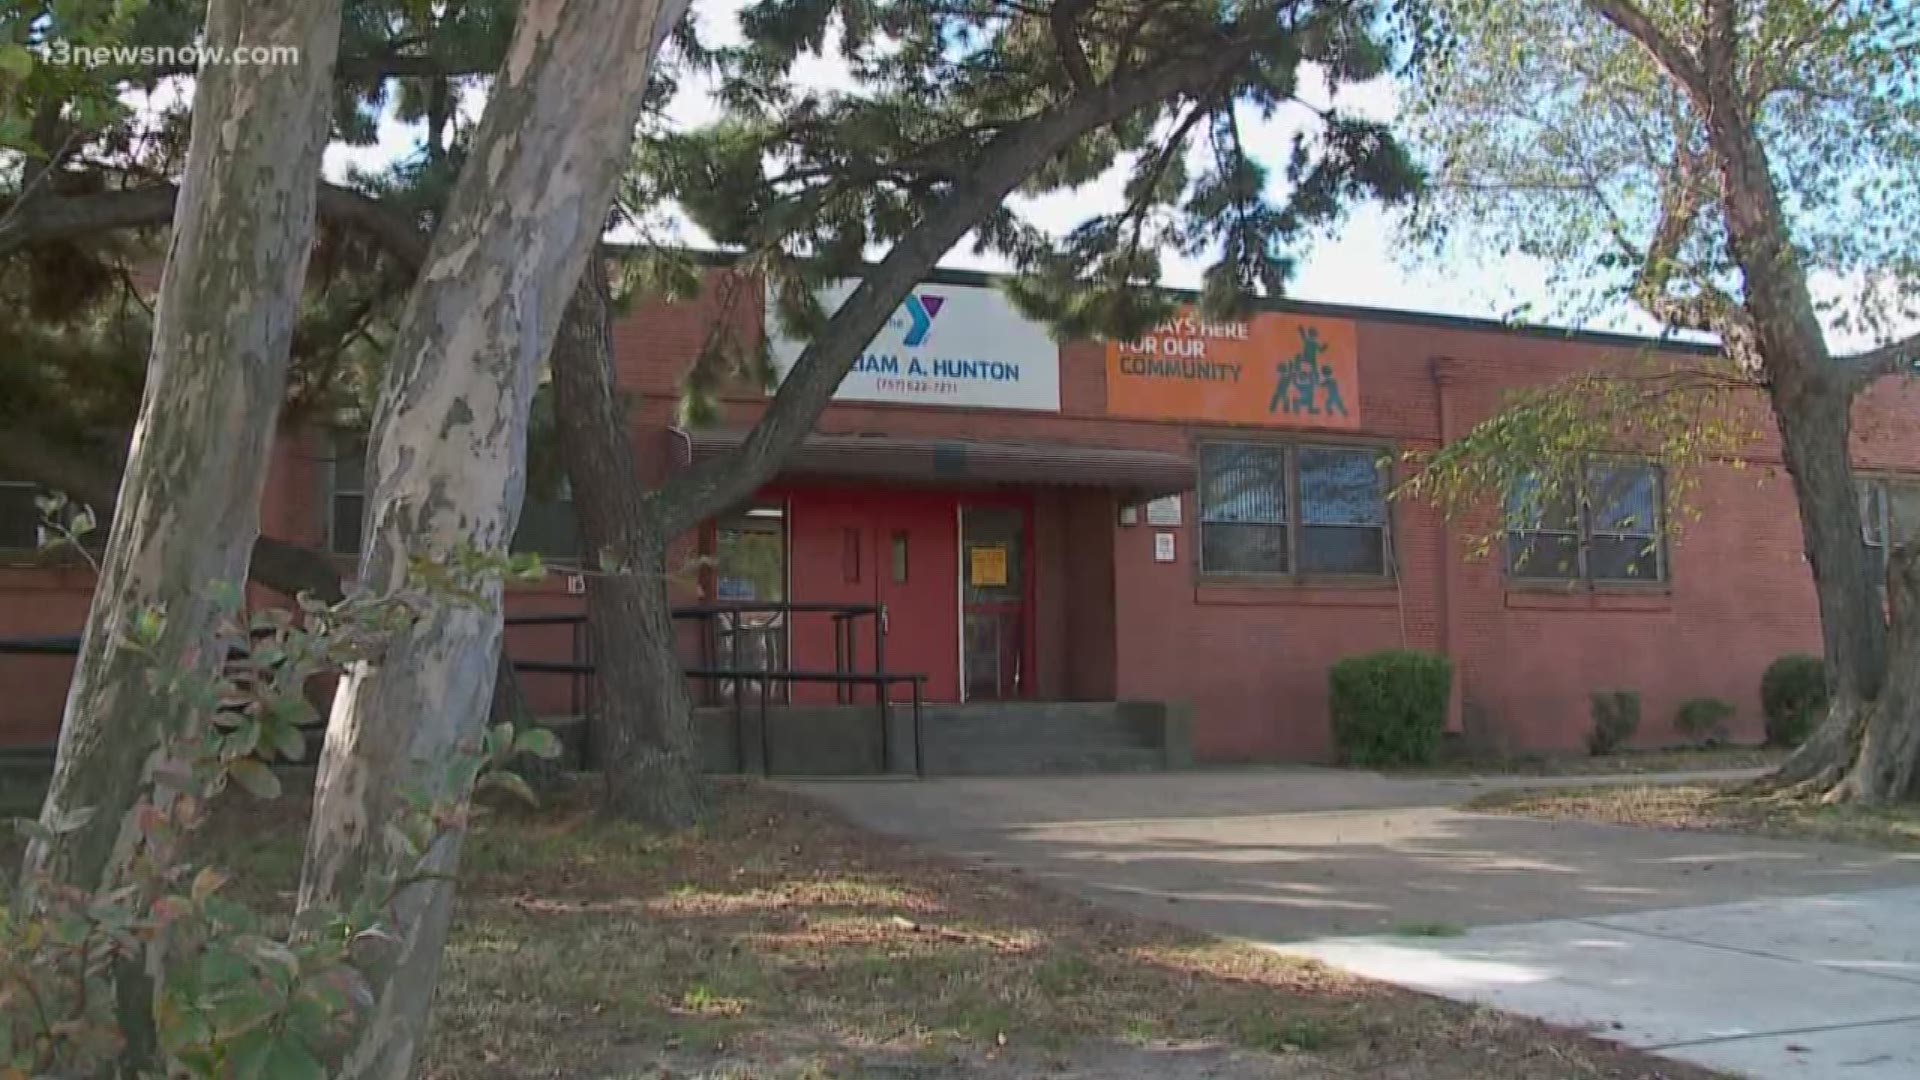 The Hunton YMCA in Tidewater Gardens is running out of money and is in serious debt. It's a safe haven for children in the neighborhood.